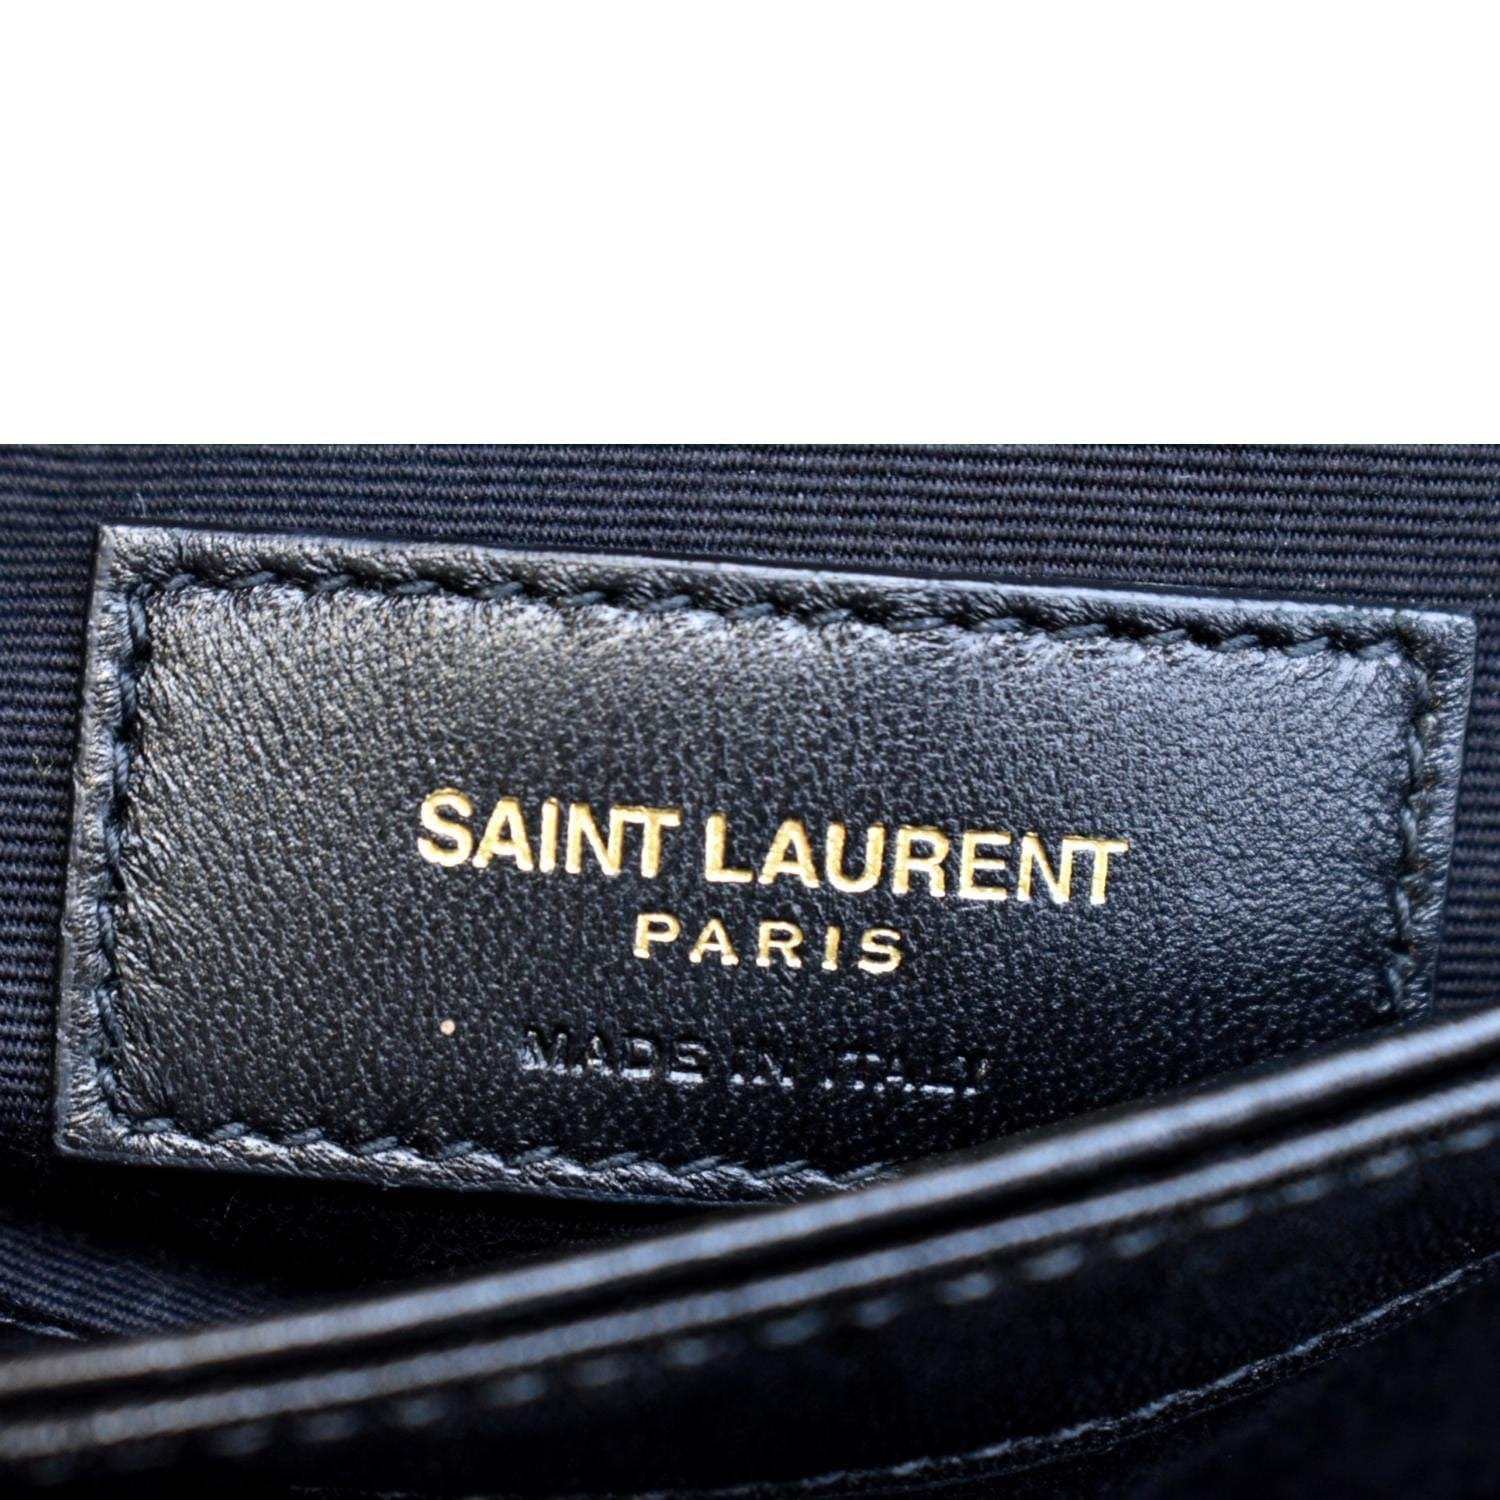 Saint Laurent Toy Loulou Bag in Safran, Yellow. Size all.